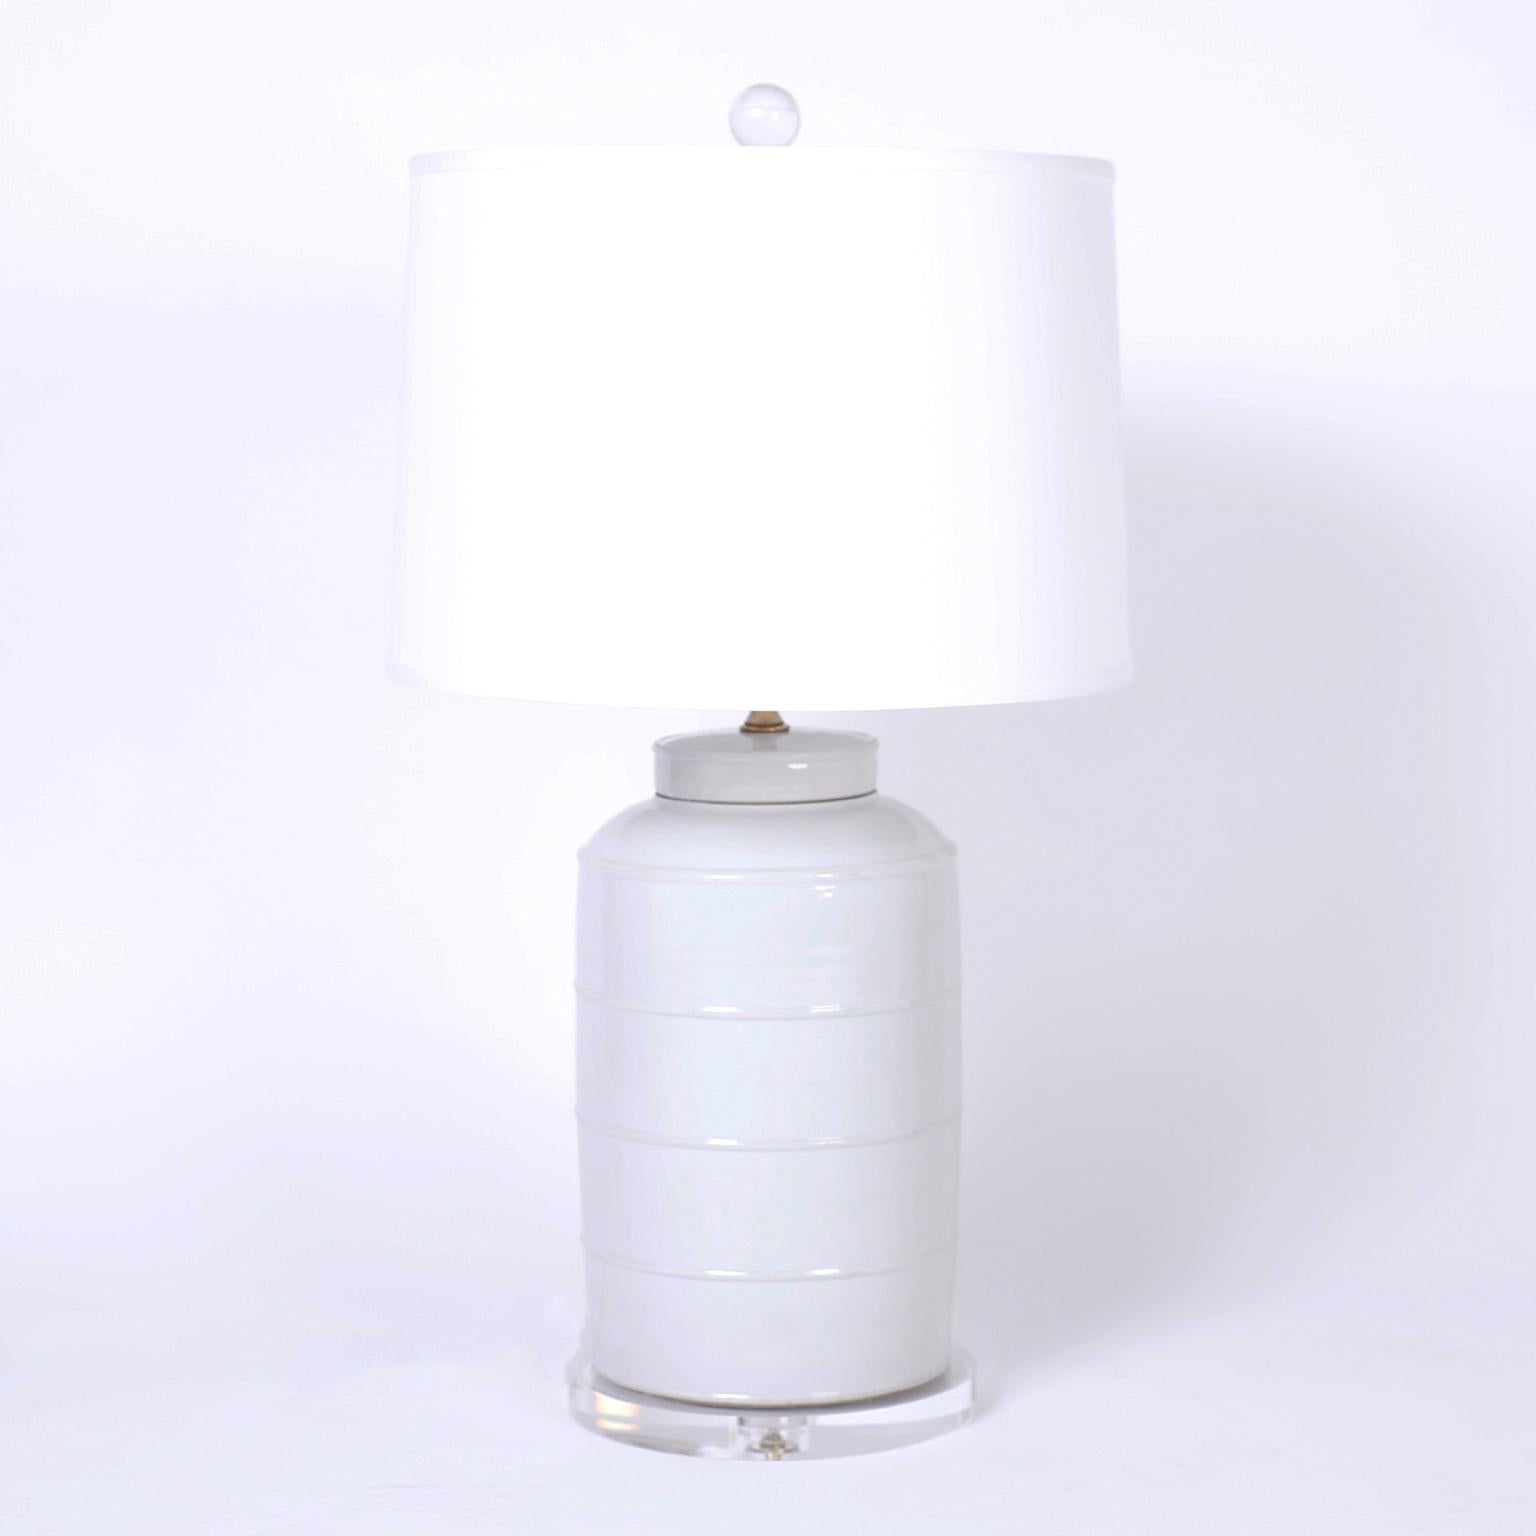 Pair of Chinese table lamps with classic form and subtle pale celadon color, presented on Lucite bases.